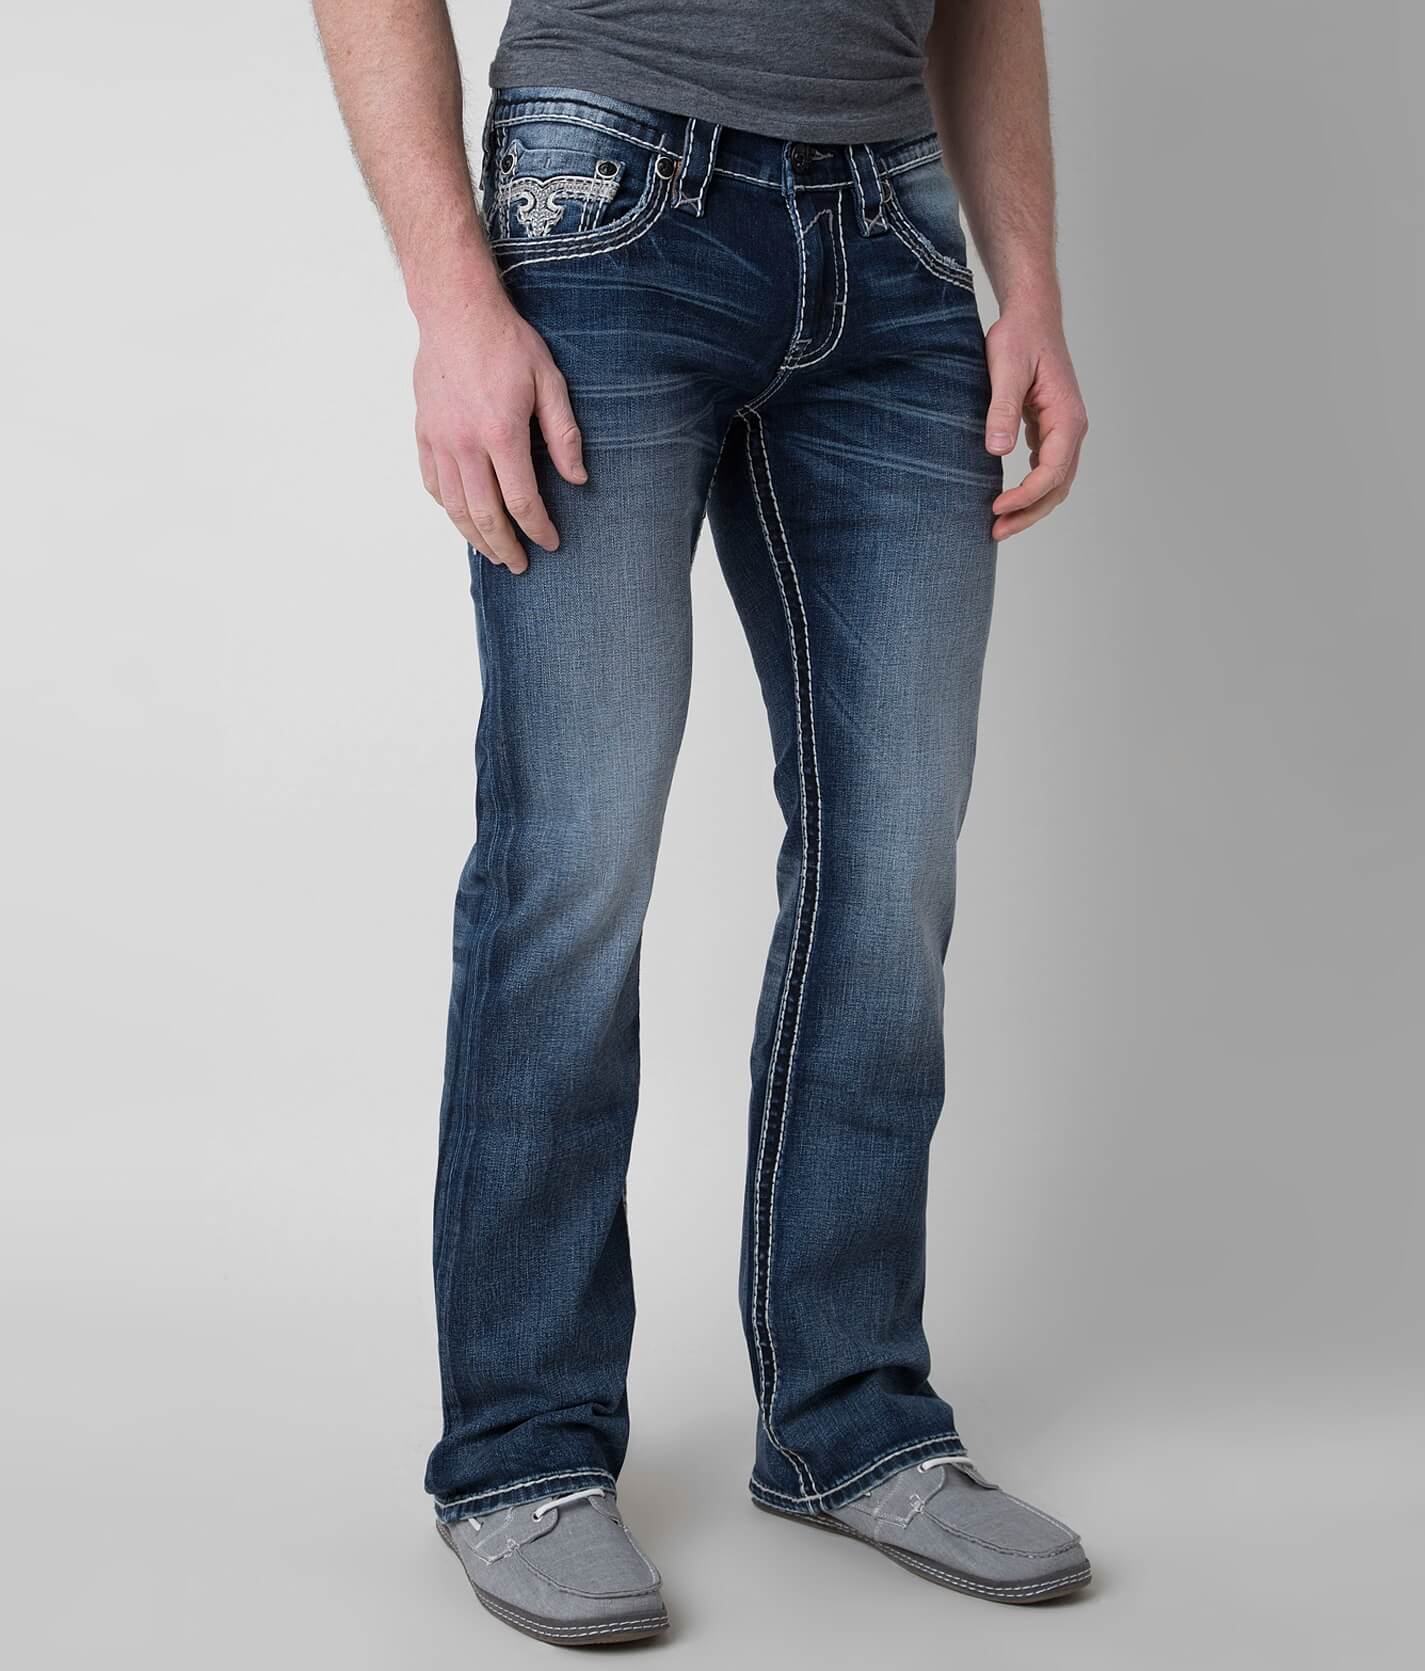 buckle mens bootcut jeans